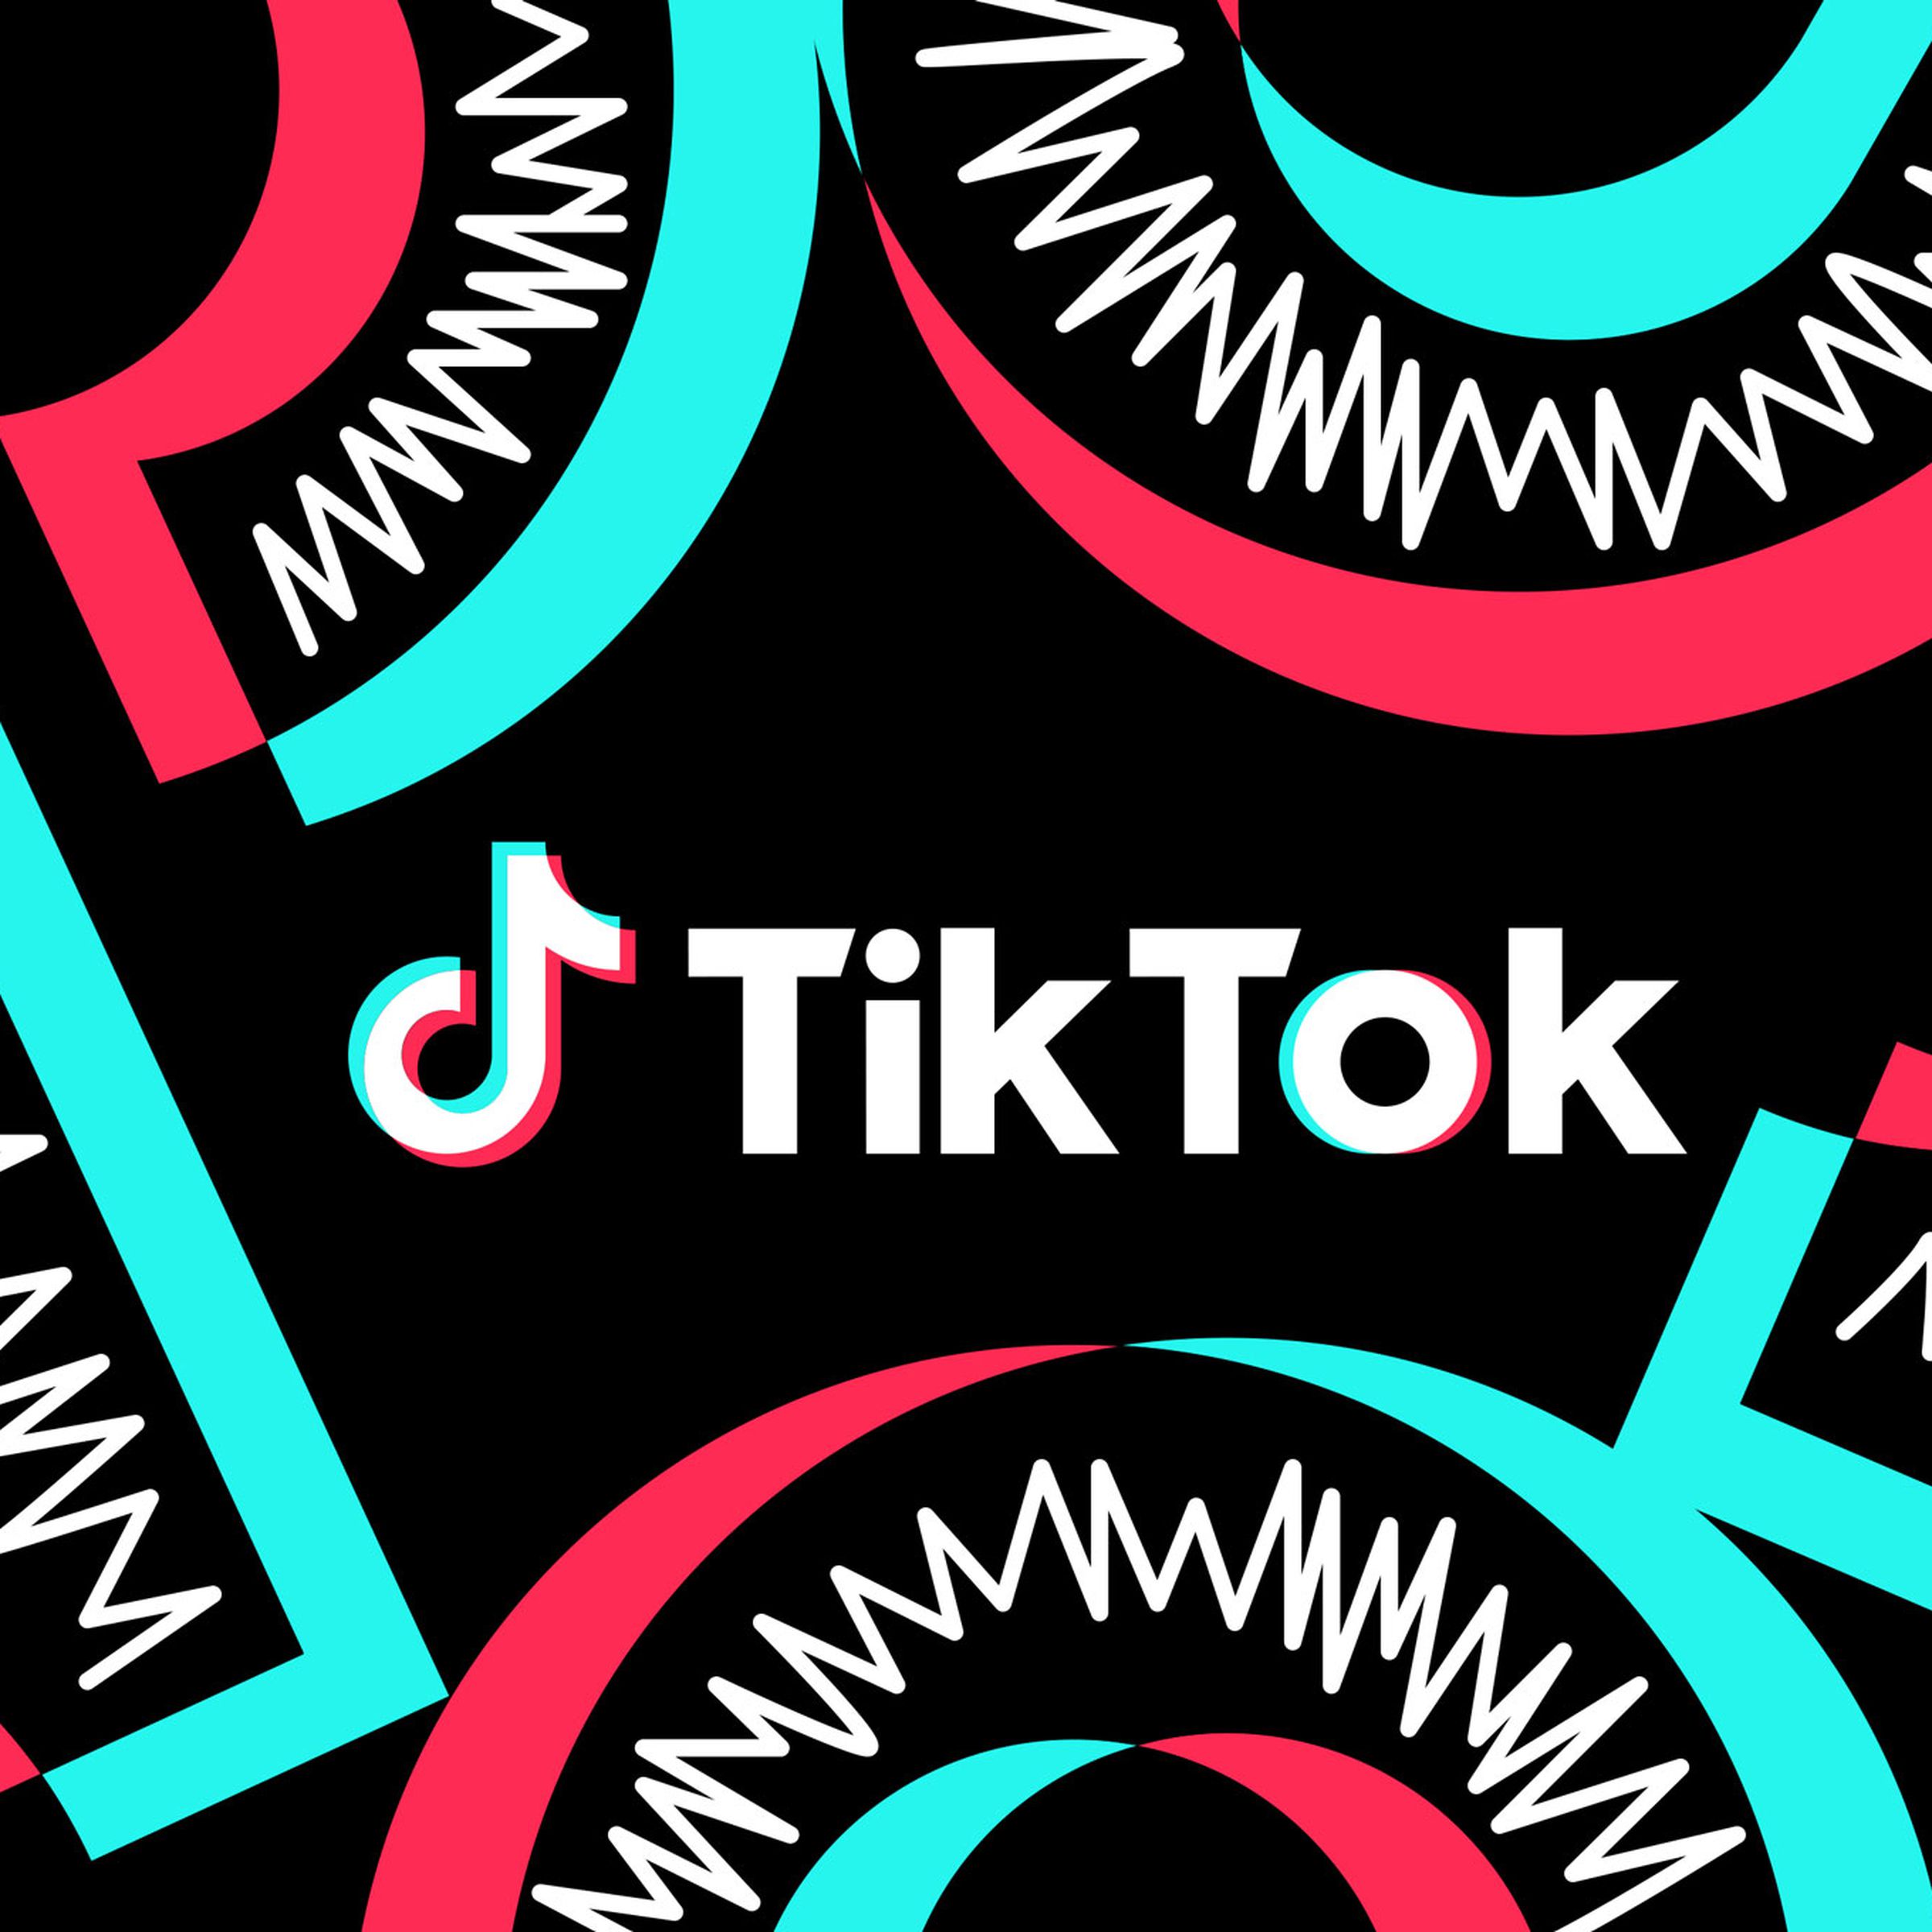 A TikTok logo surrounded by jazzy lines and colorful accents